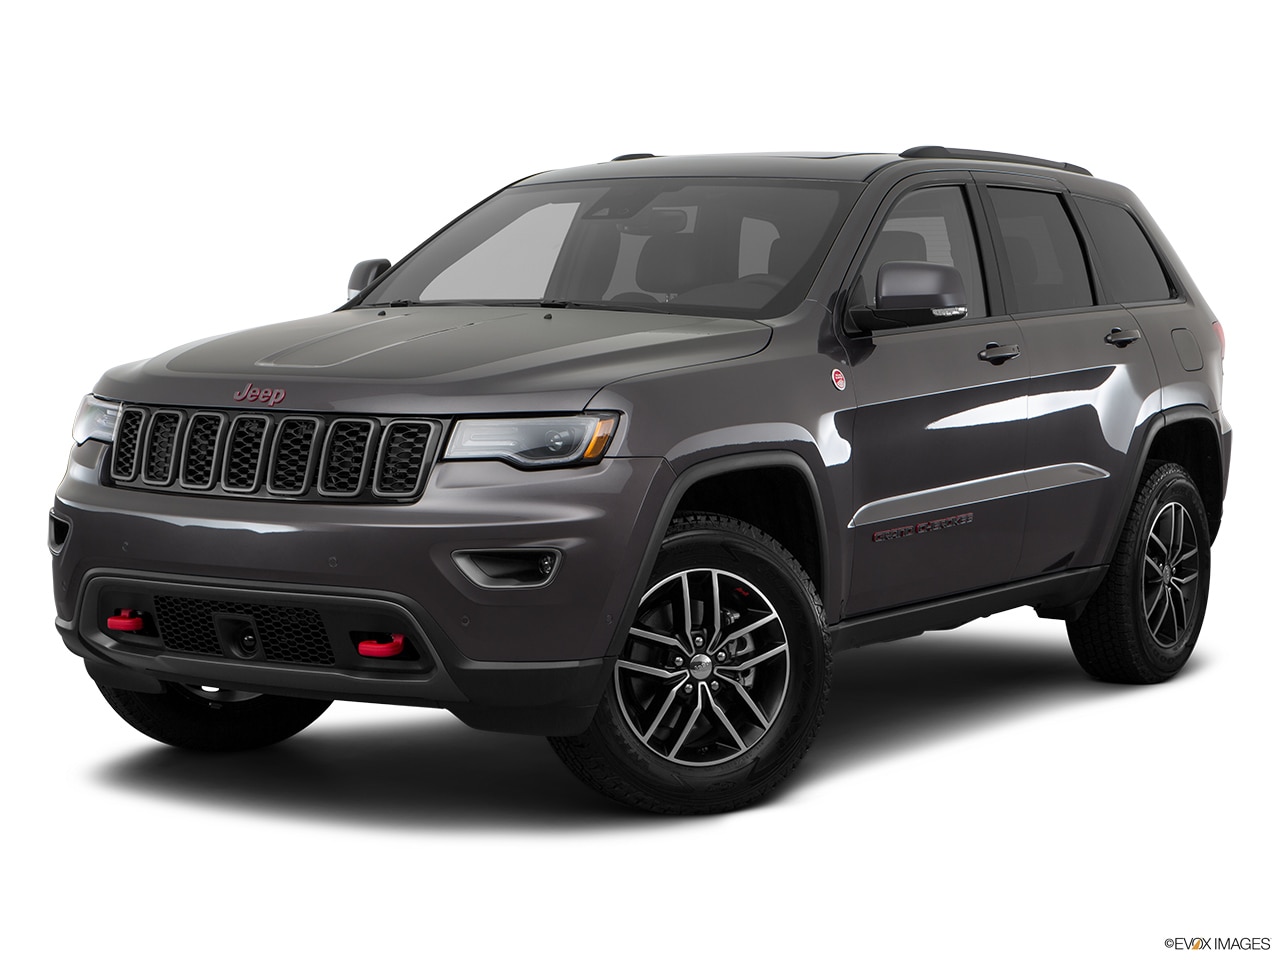 2018 Jeep Grand Cherokee Lease Deals